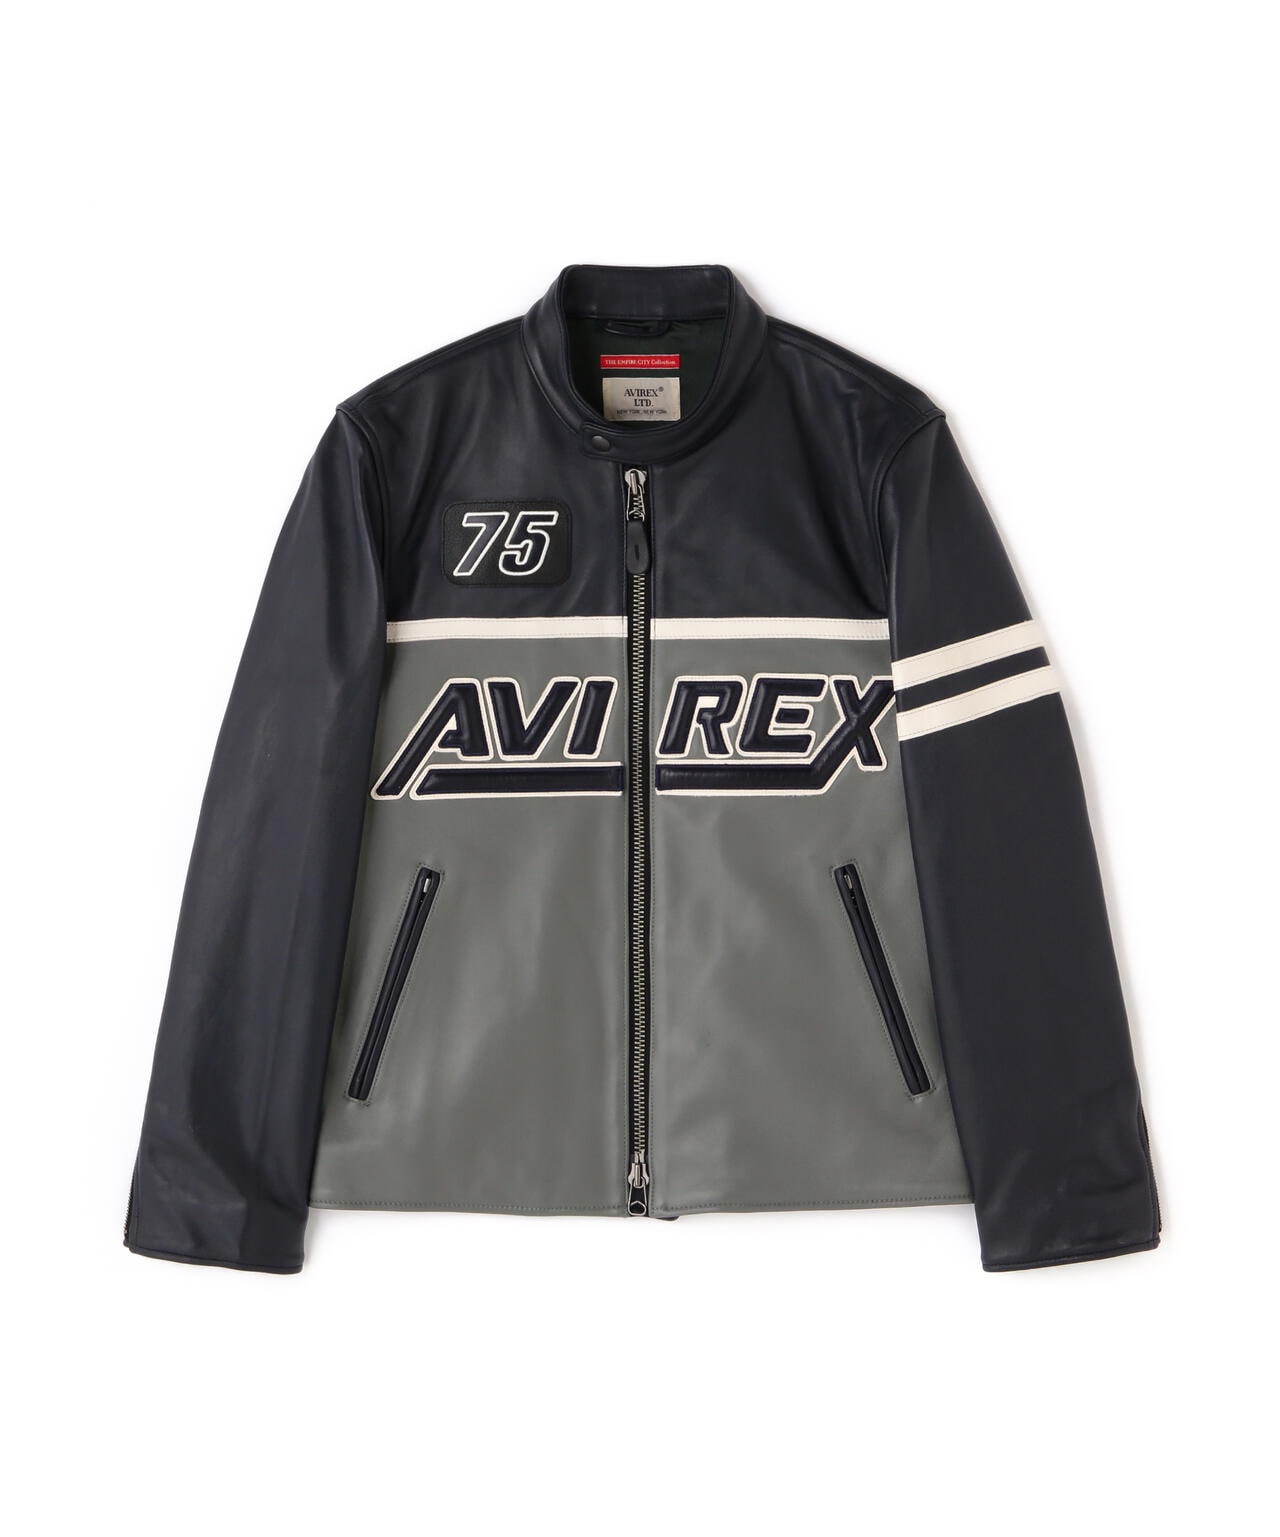 COLLECTION》LEATHER RACING JACKET / レザー レーシングジャケット